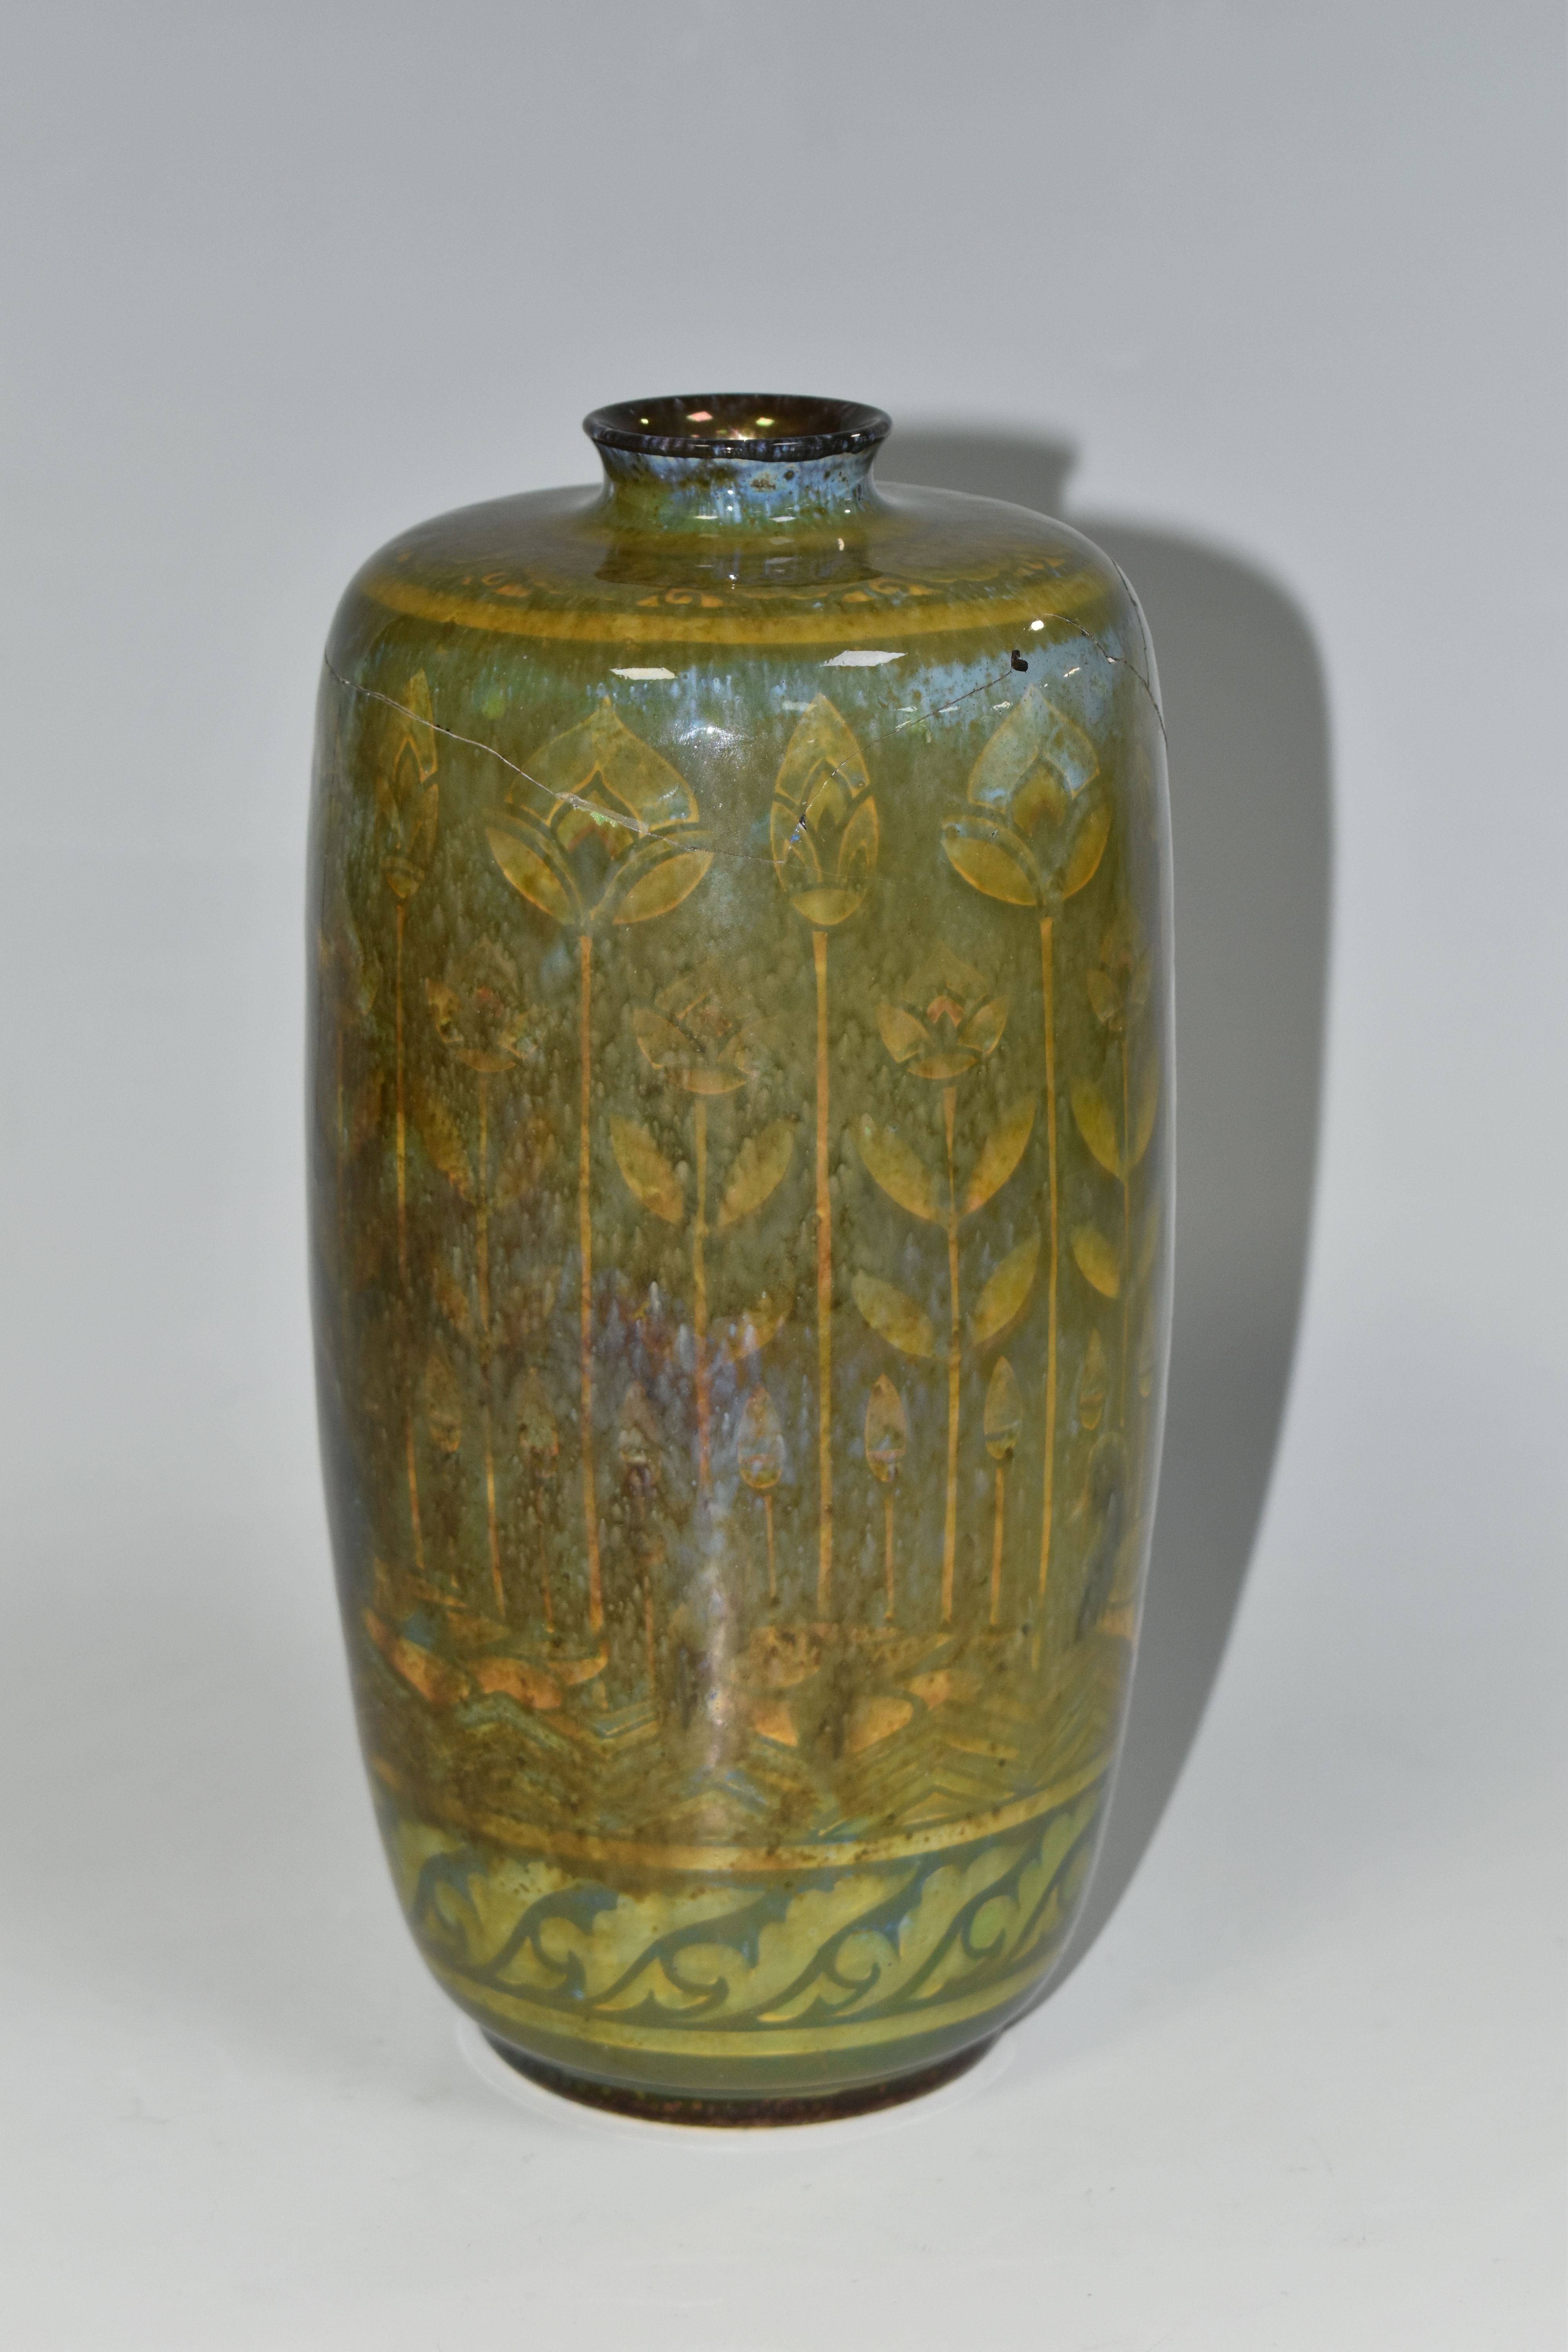 A PILKINGTON'S VASE, decorated with yellow stylized reeds and ducks on a mottled green ground,